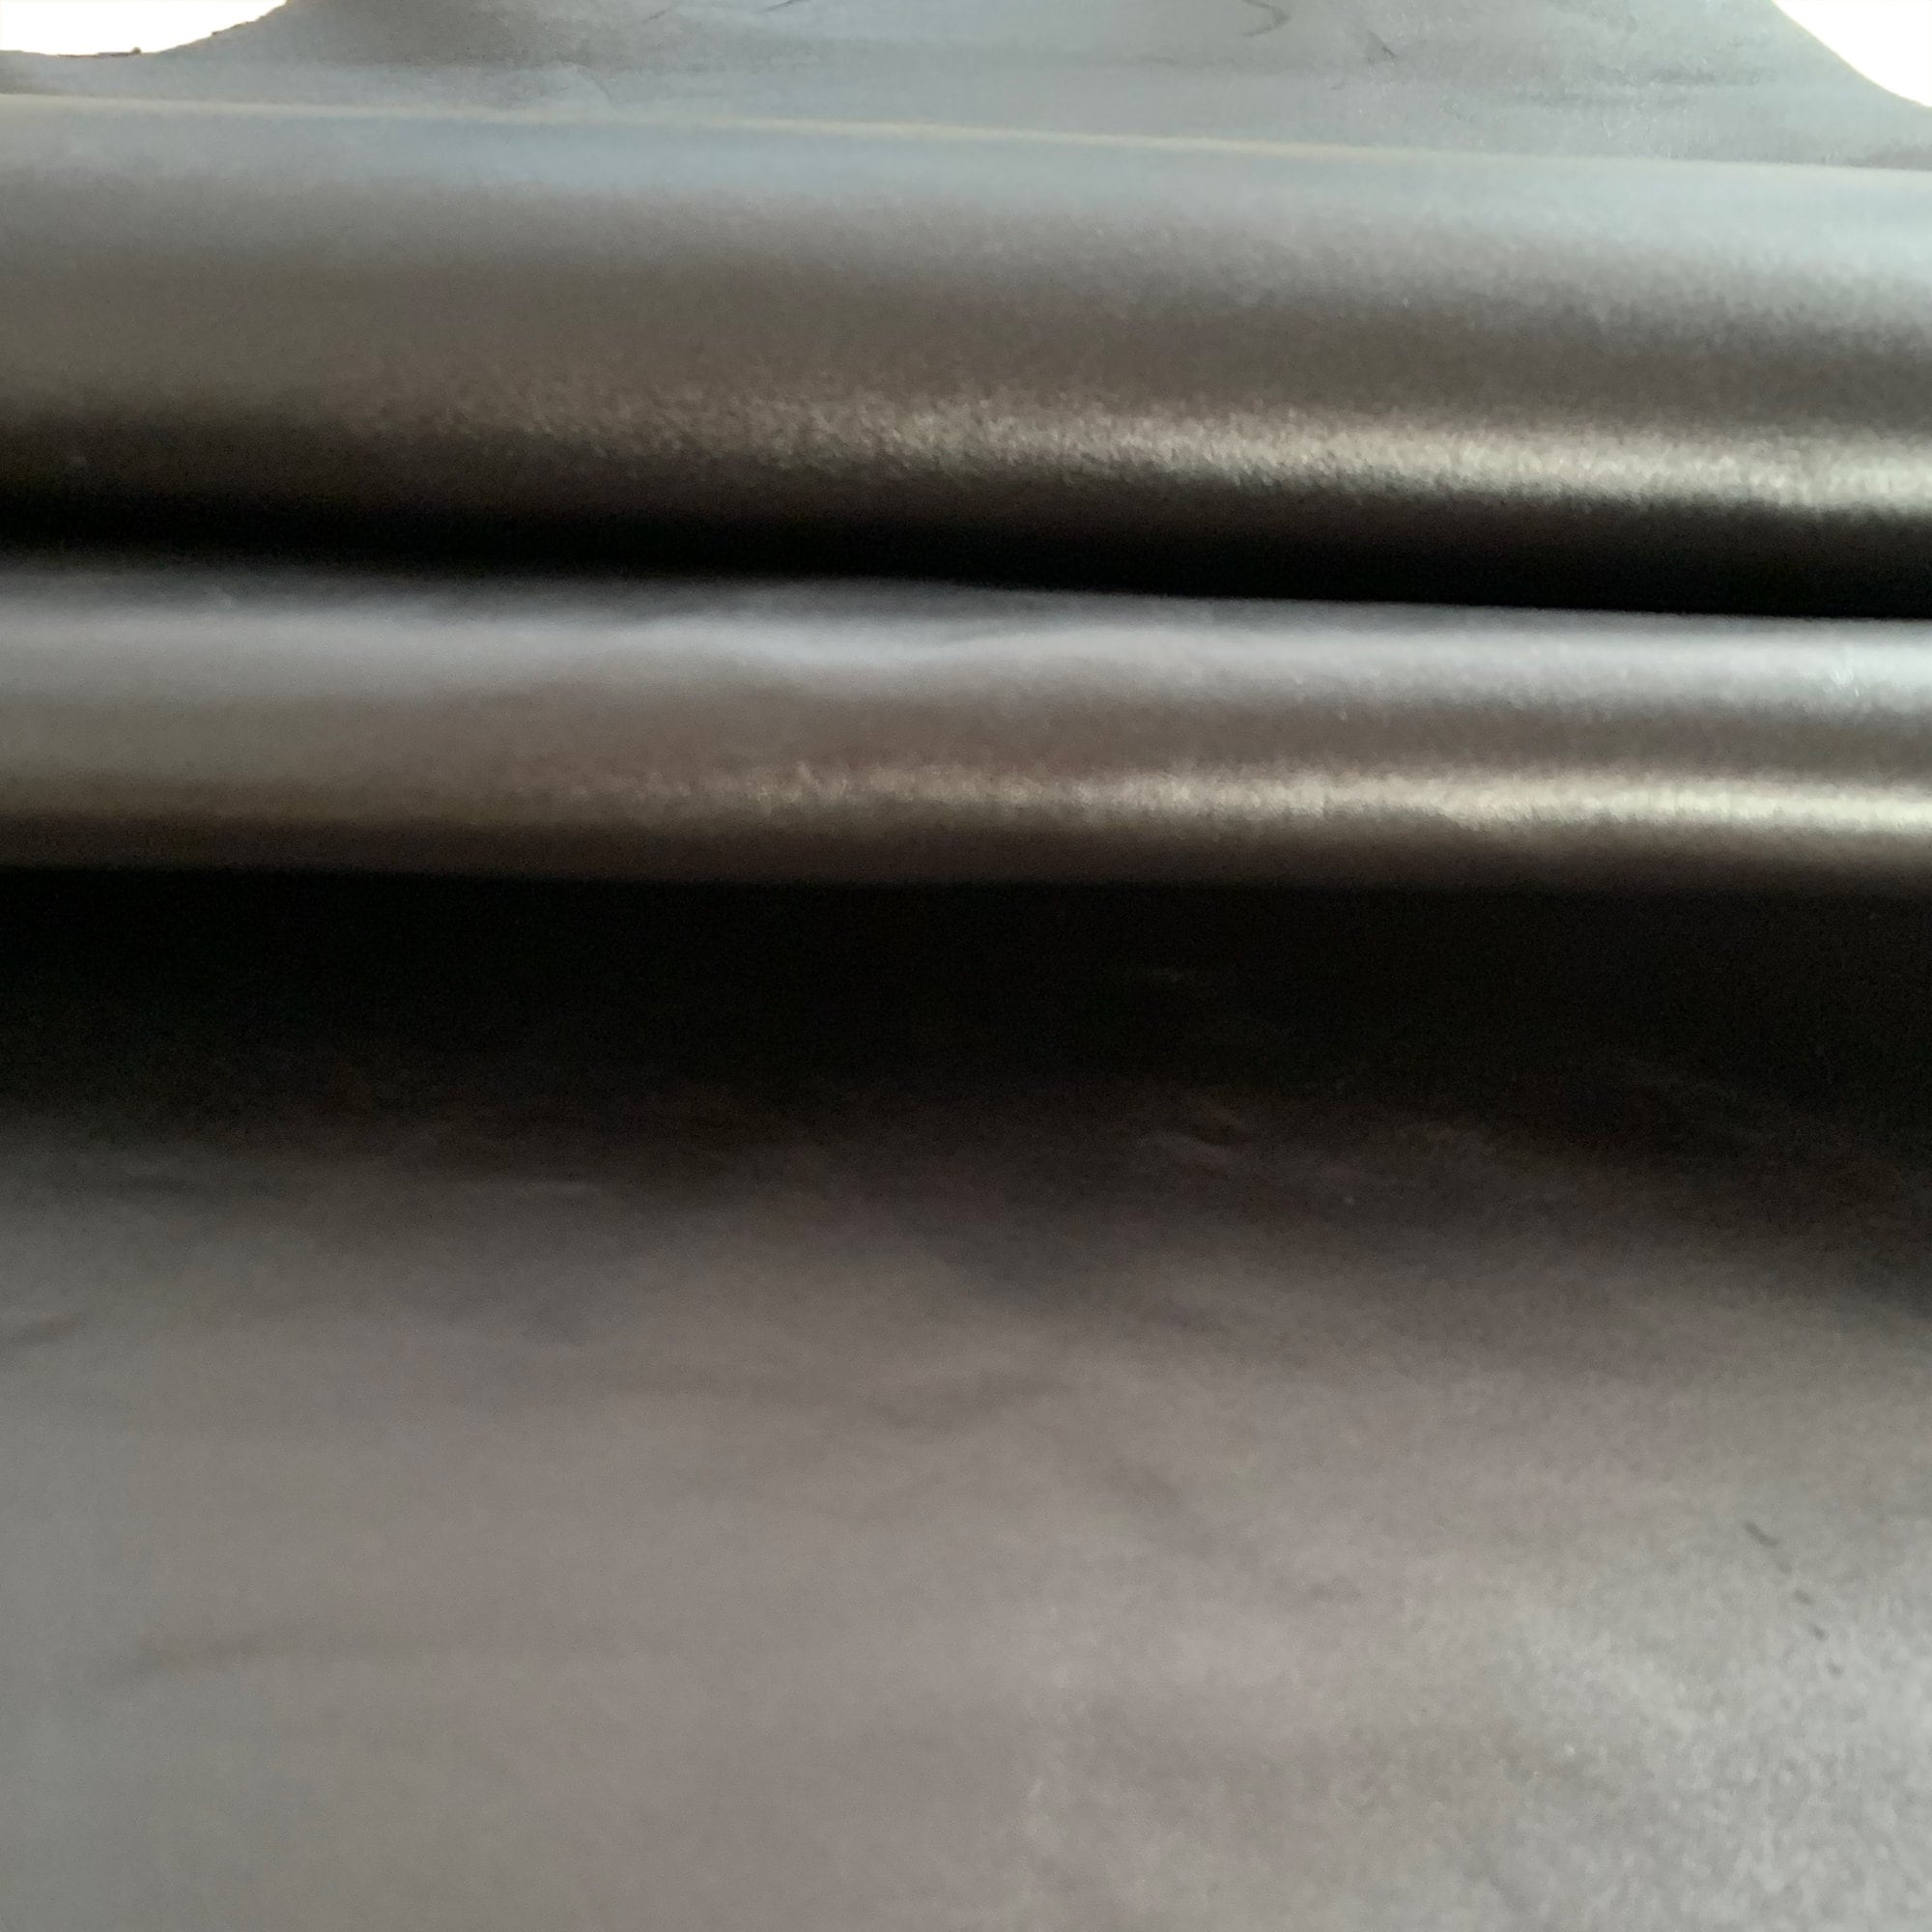 Light GRAY Leather Fabric// Genuine Sheep Sheets for Sewing// Gray Lambskin Leather  for Crafting//agate GRAY 571, 0.8mm/ 2oz 